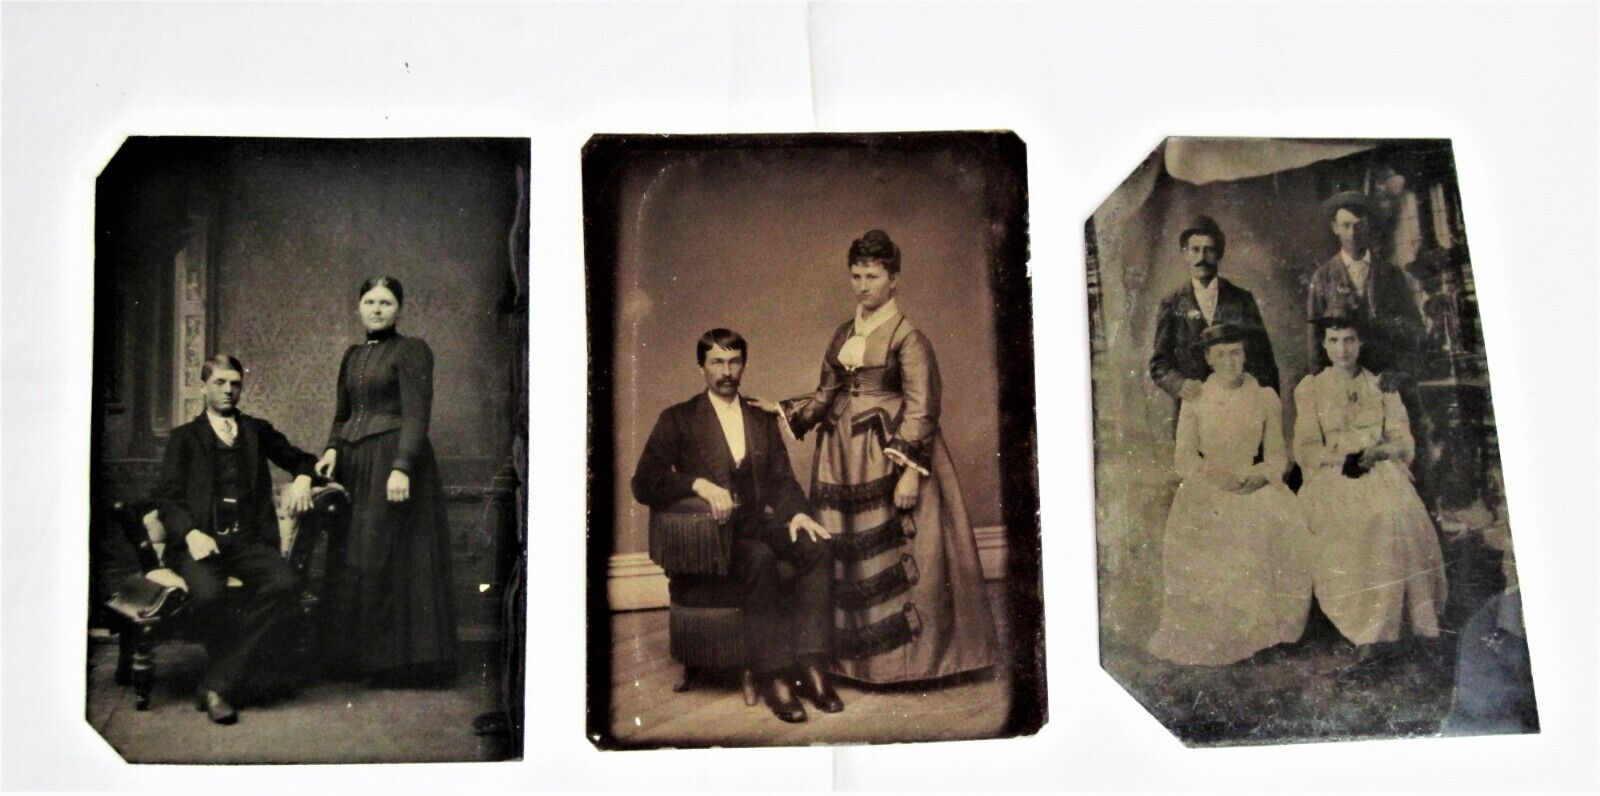 Lot of 3 Antique Tintypes of Couples - 1800\'s